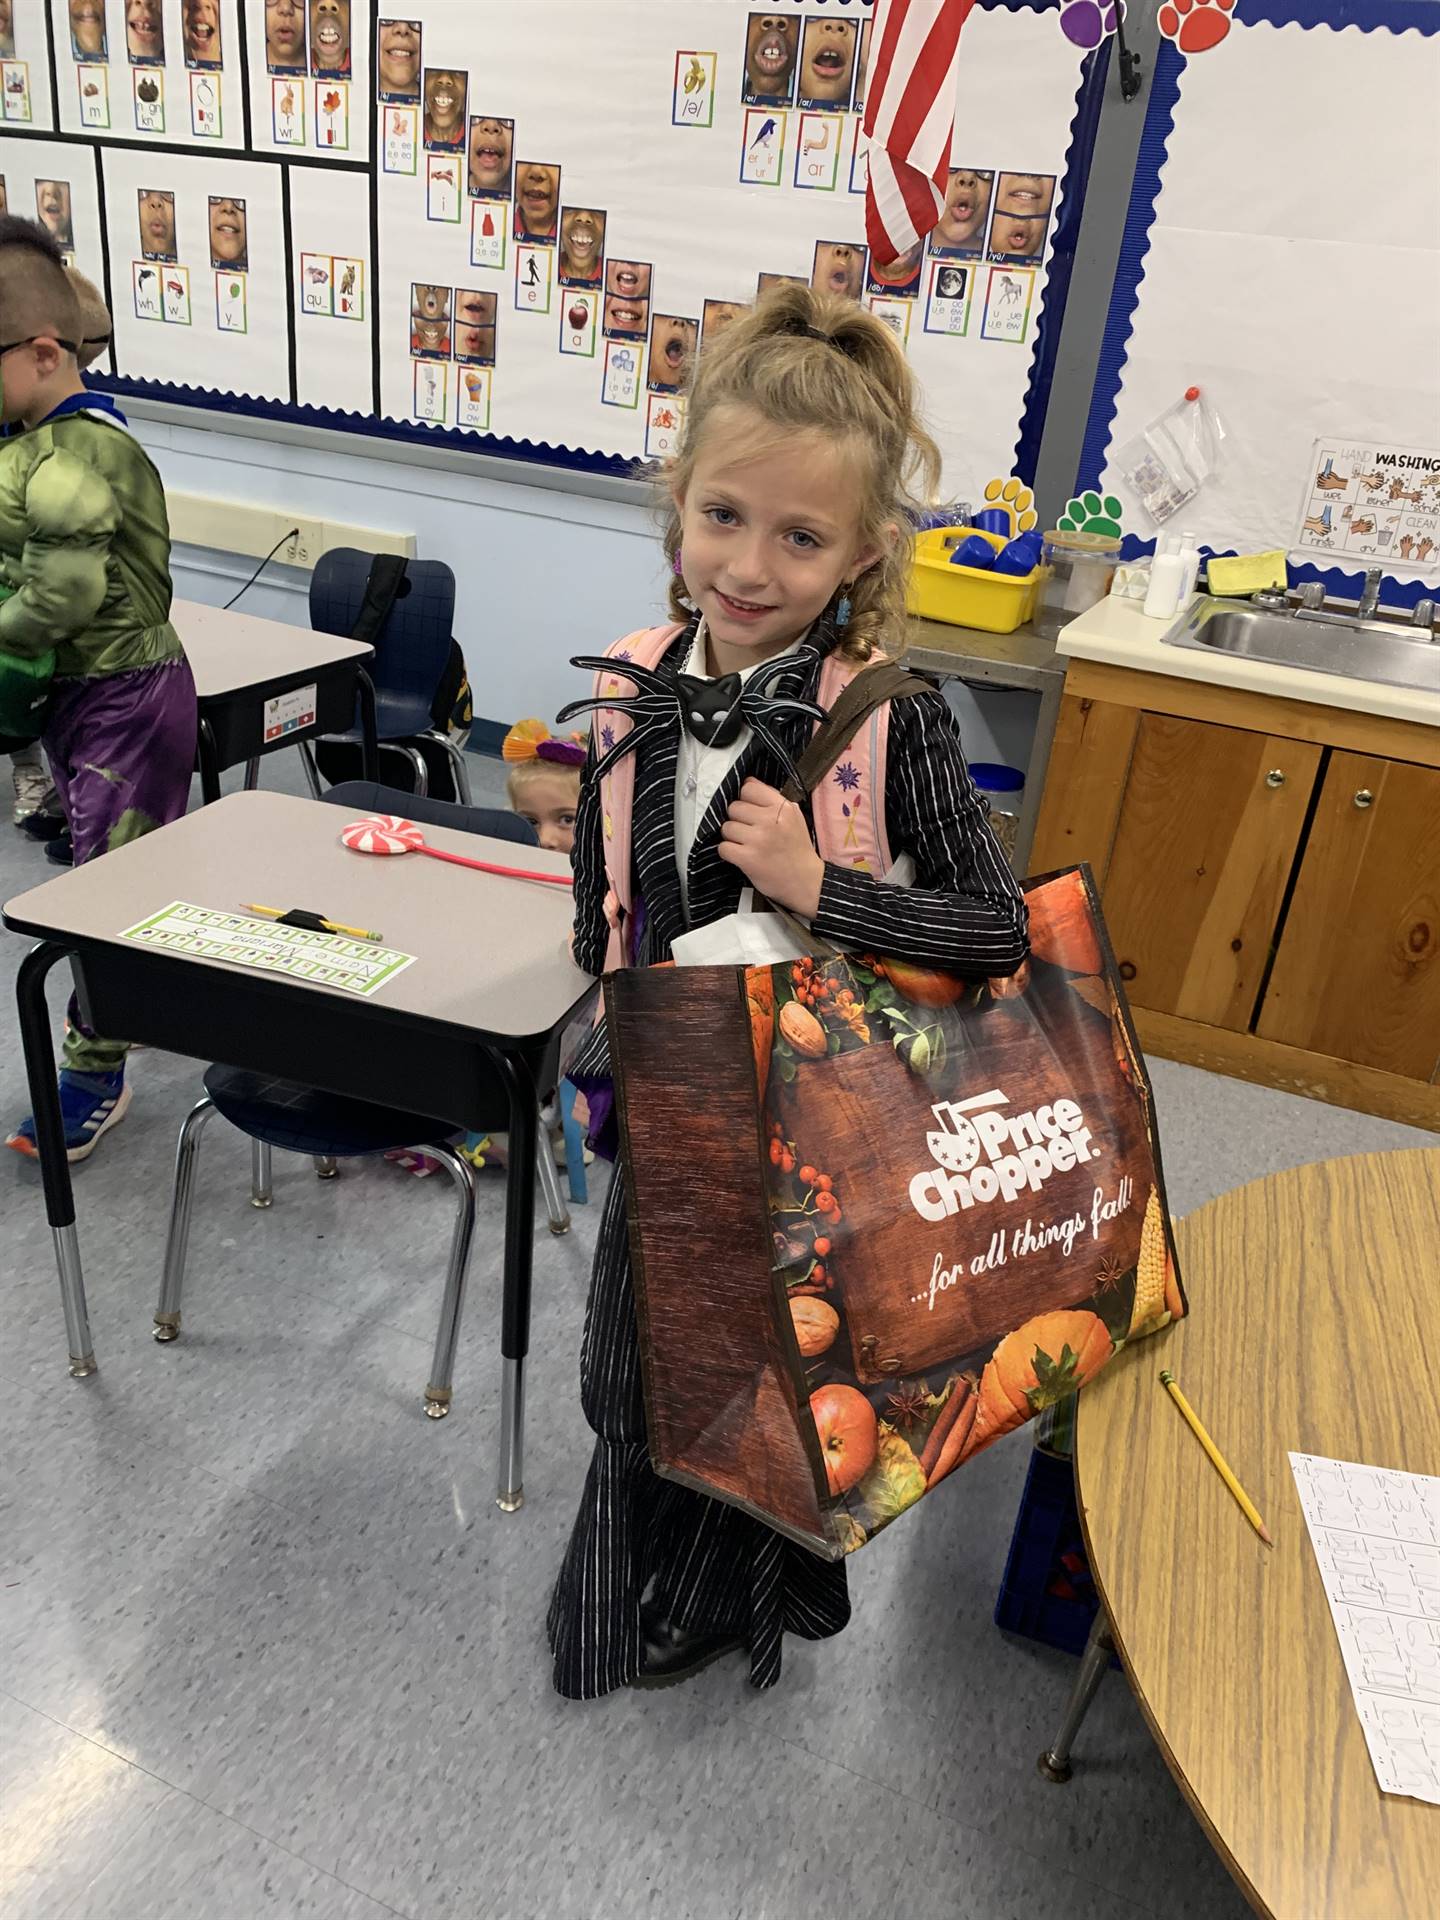 a student dressed up holding a bag